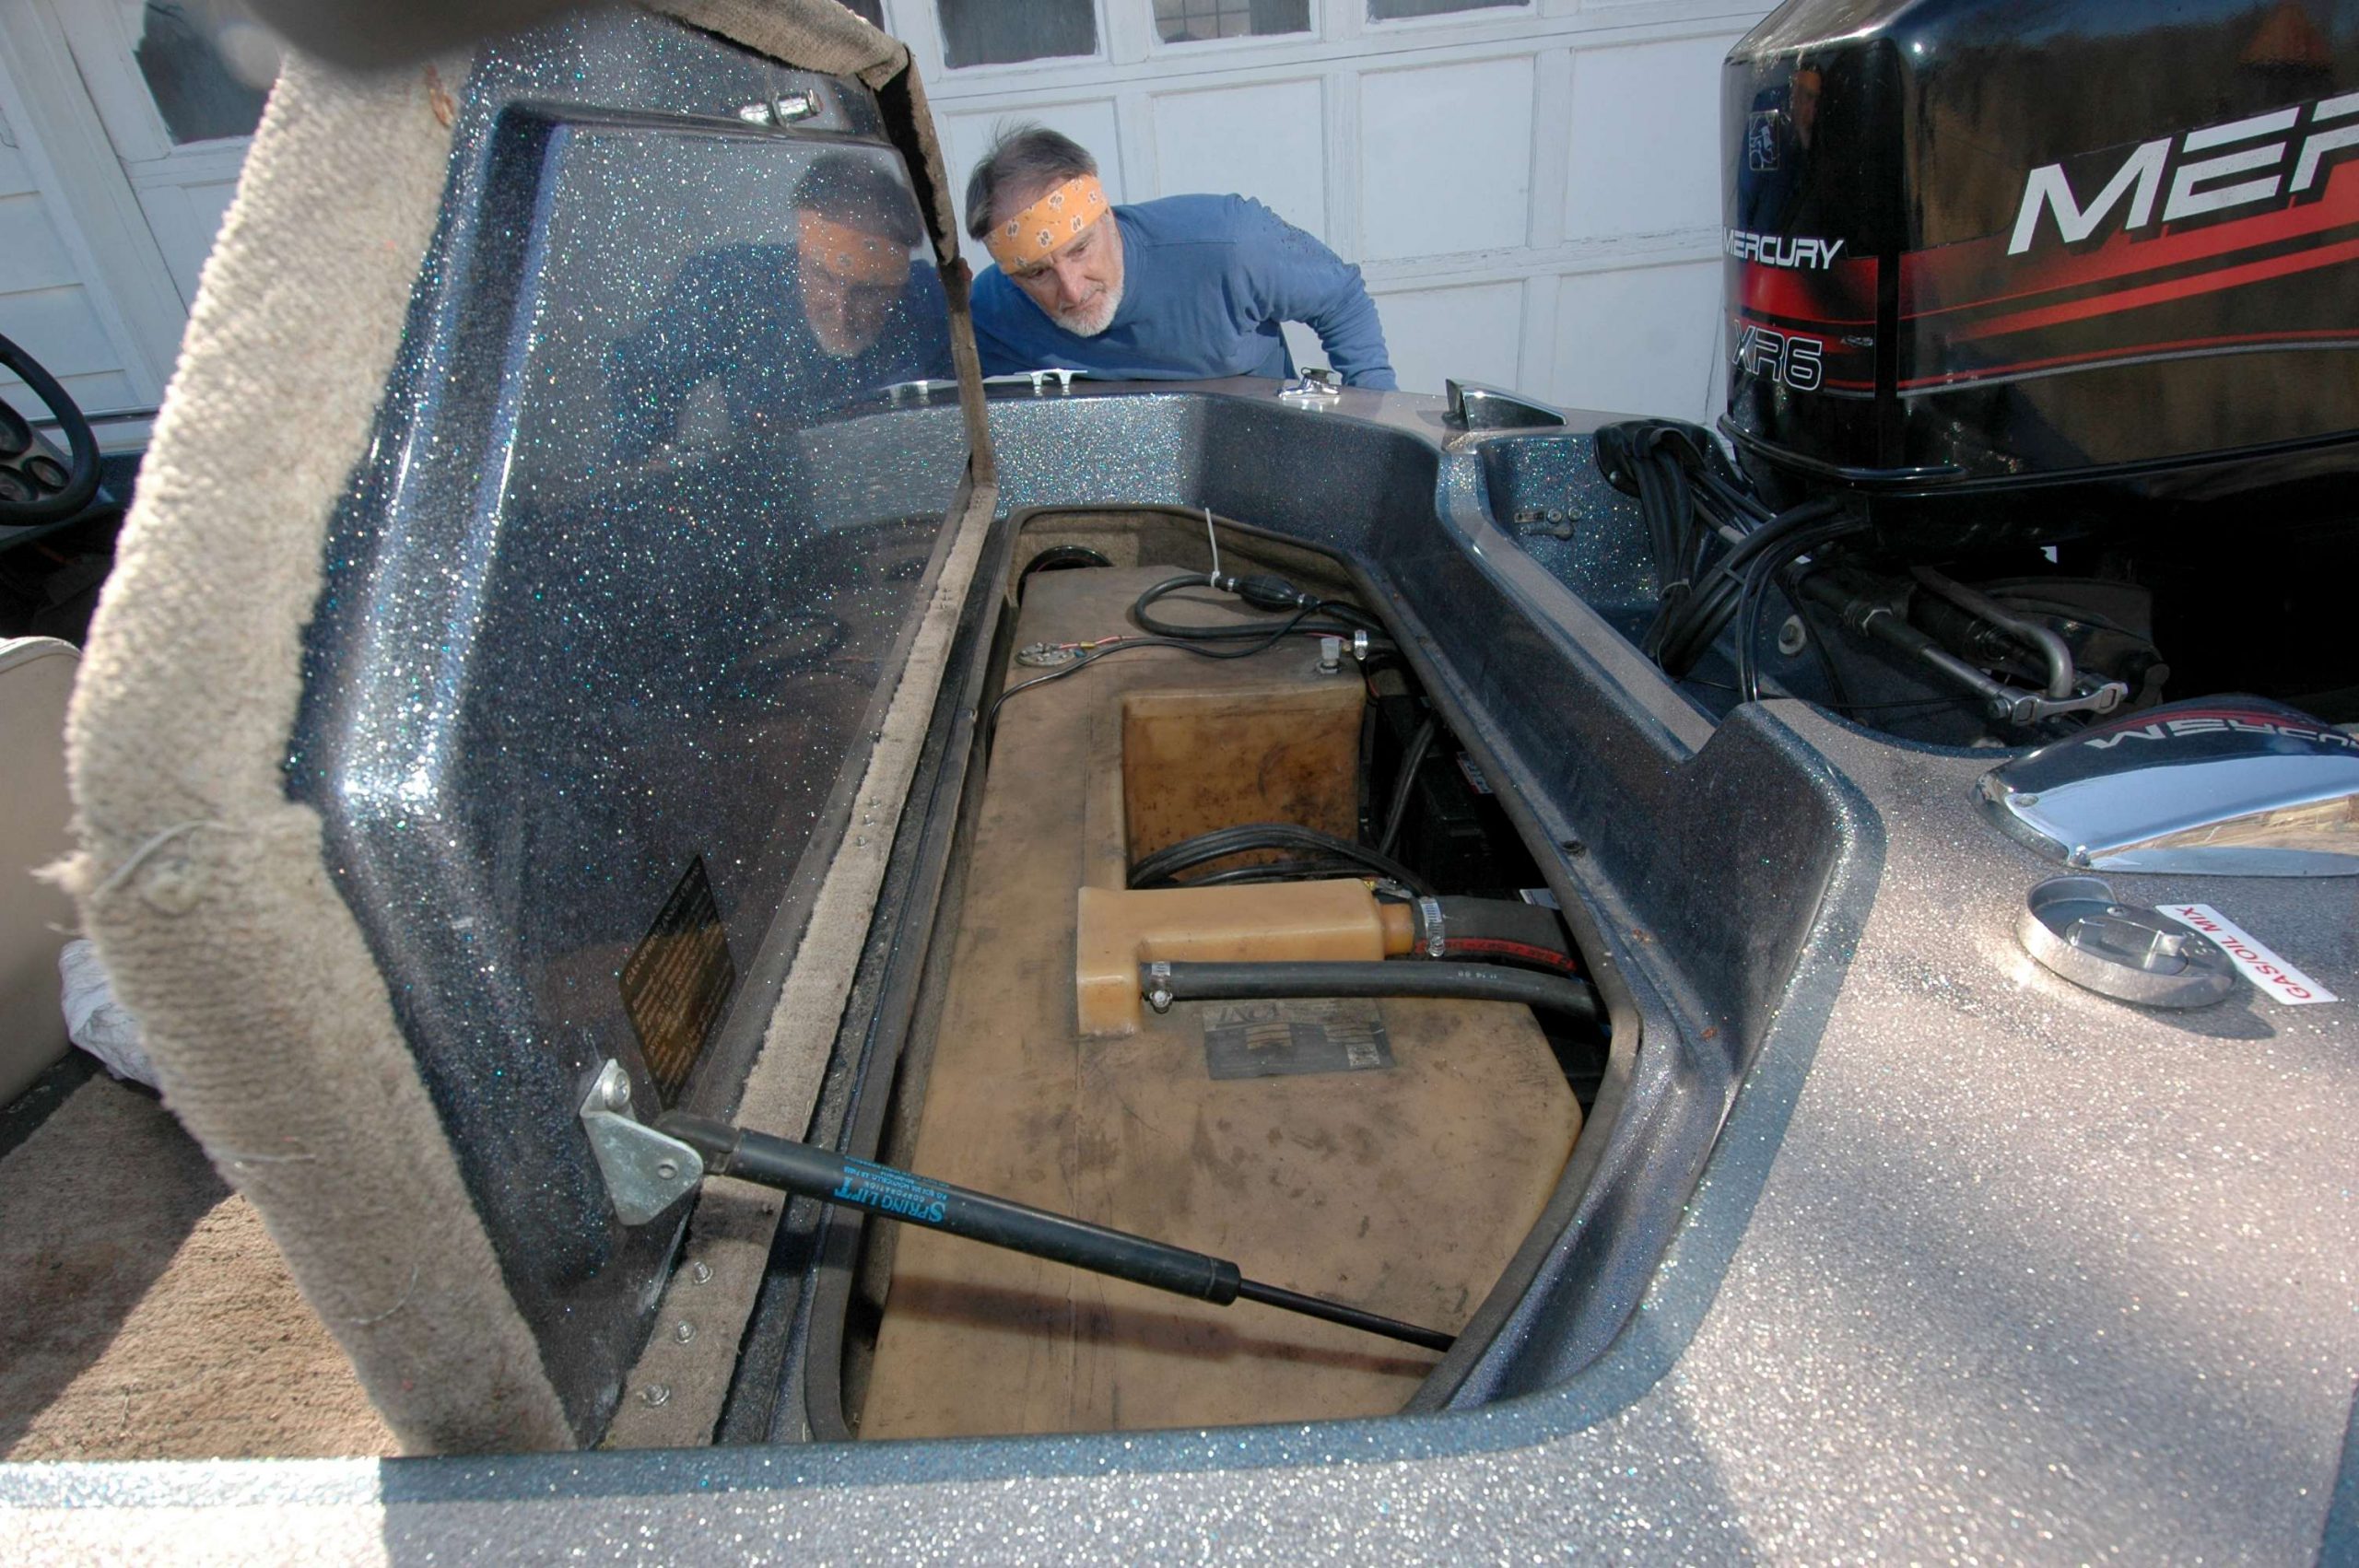 Inspect the bilge area for possible damage. Be mindful of gas tank connections and the smell of gas. You don't want to deal with a leaking gas tank.